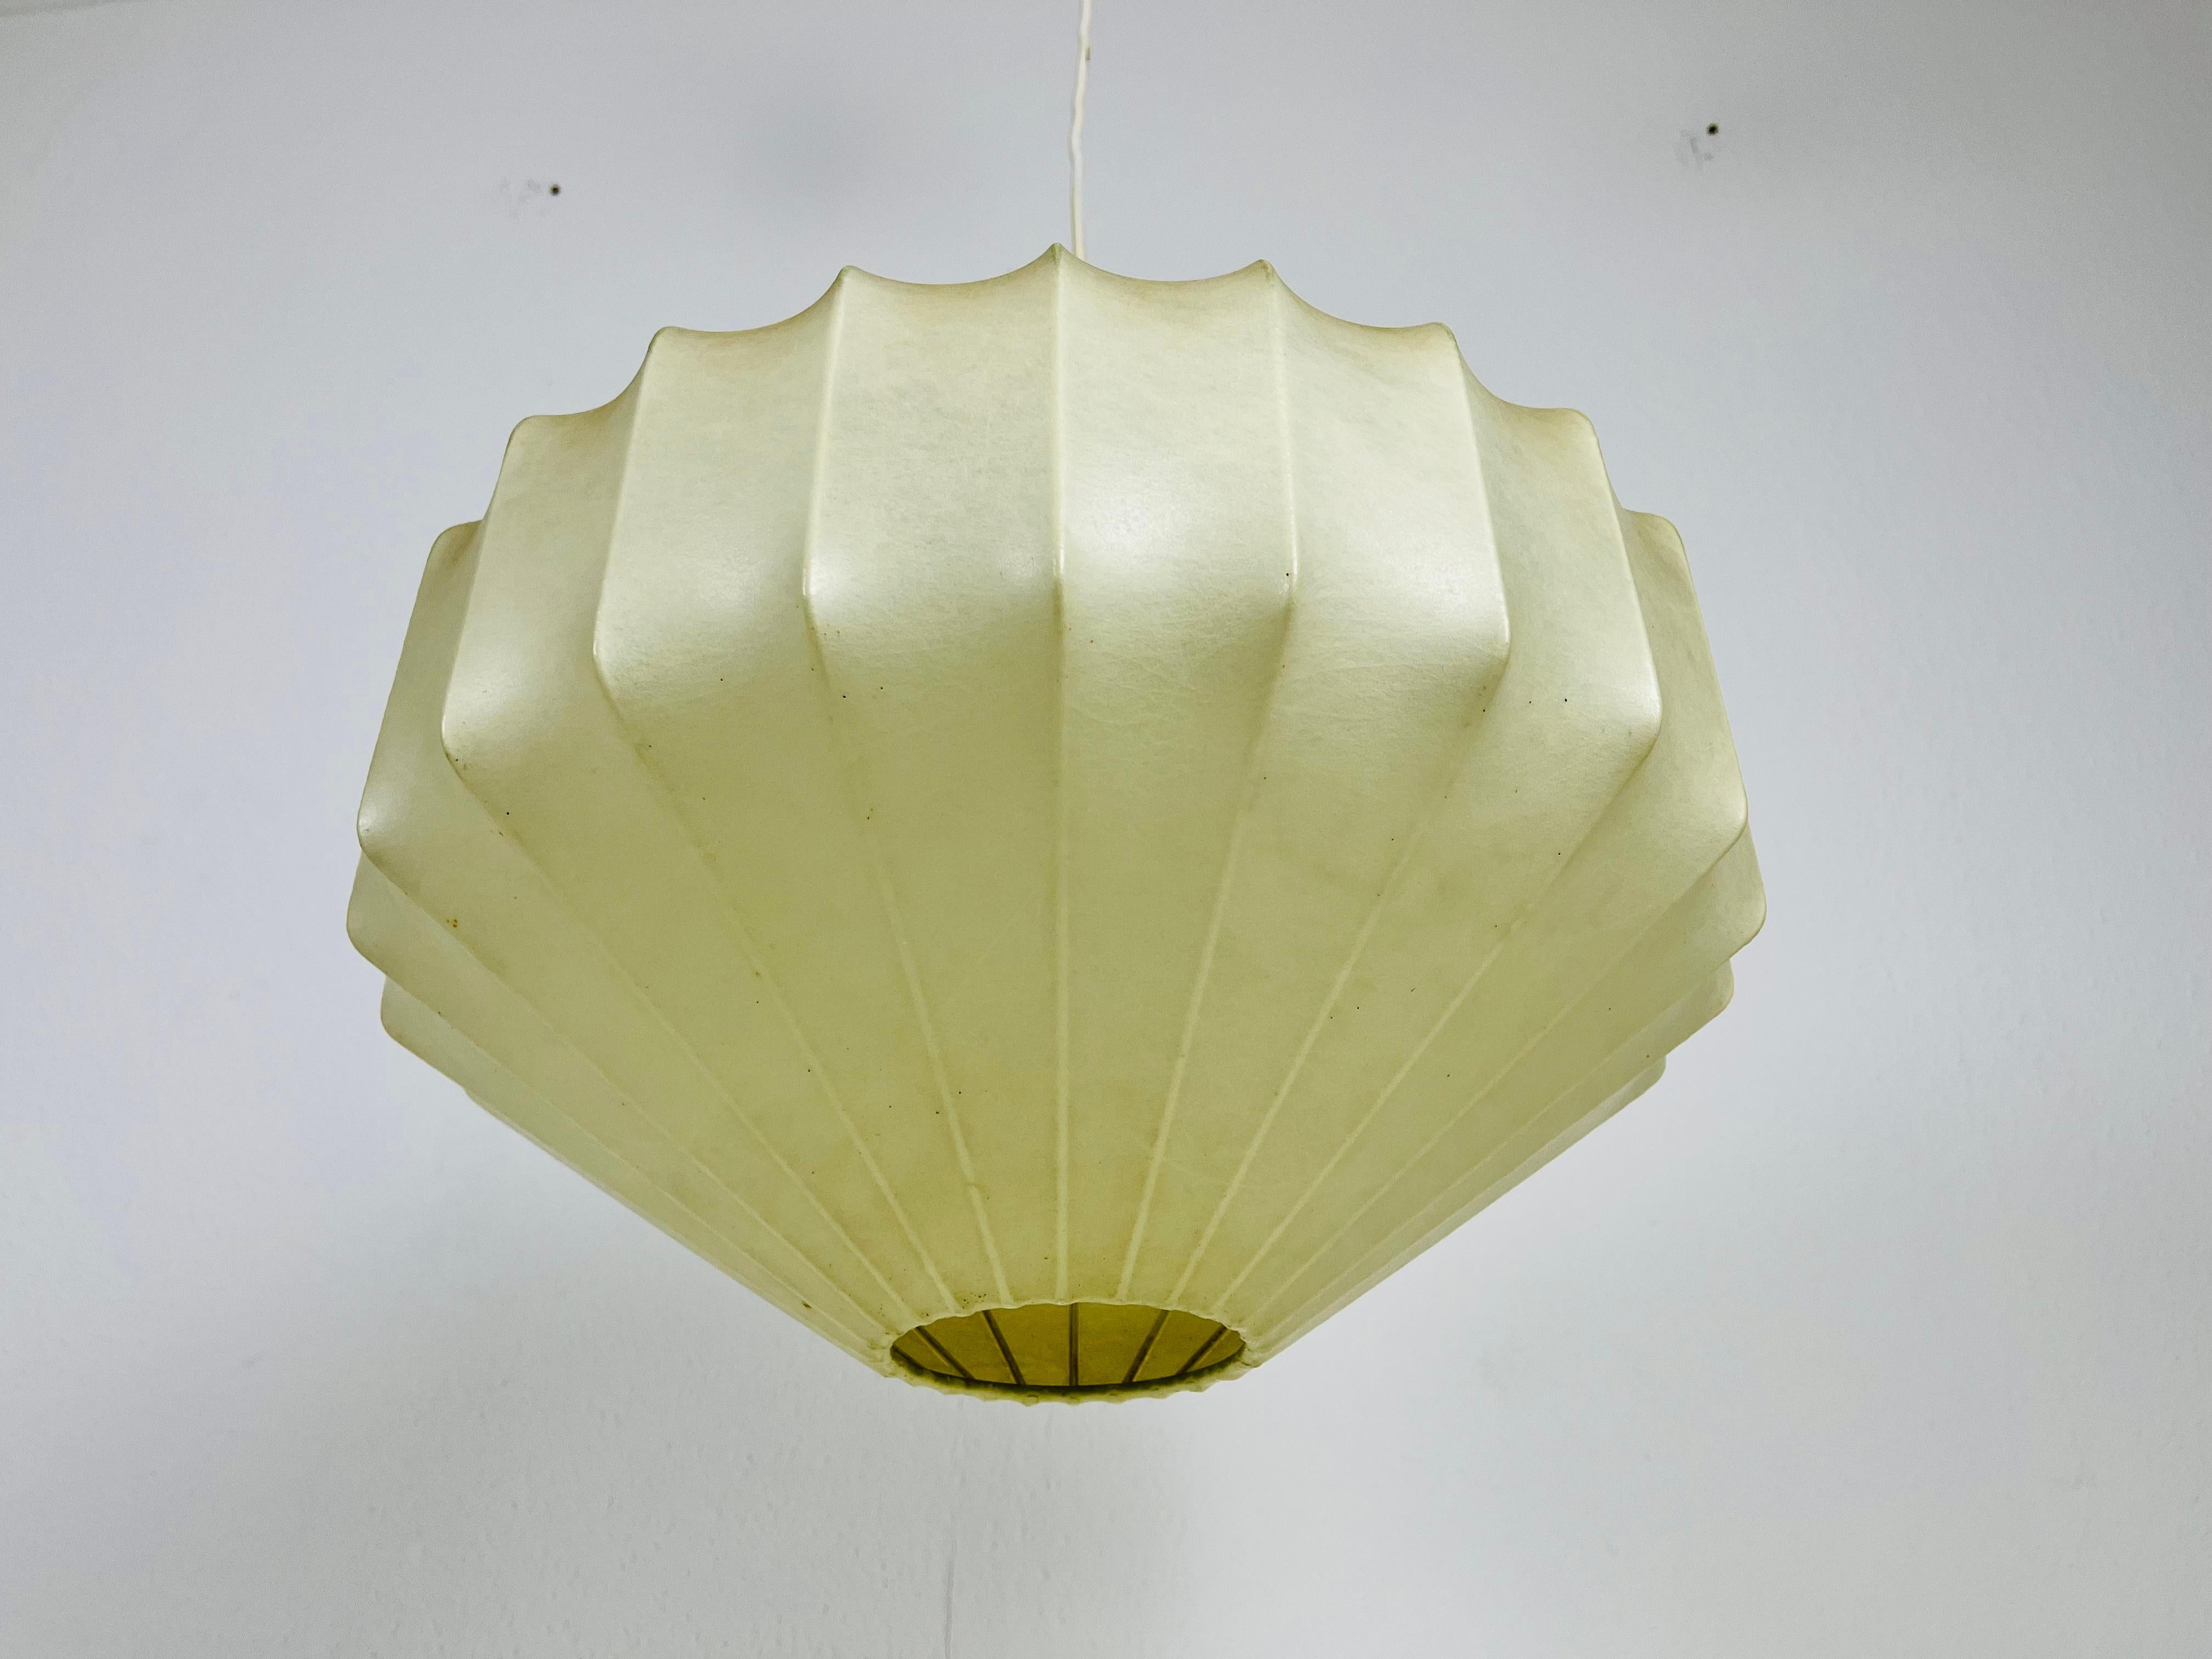 Midcentury Cocoon Losange Pendant Light, 1960s, Italy For Sale 3